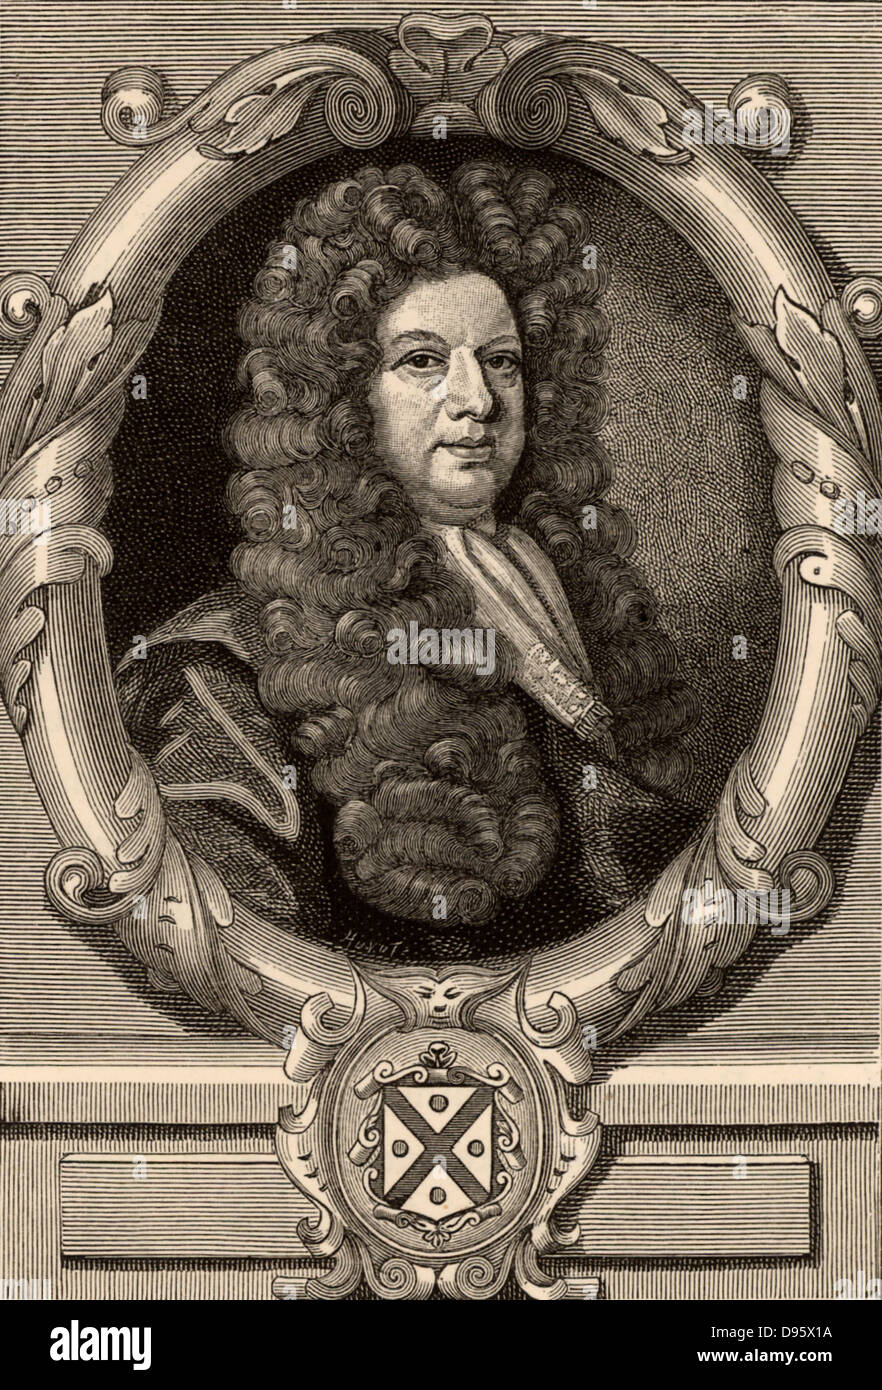 John Blow (1649-1709) English composer and organist.  Engraving after the frontispiece of 'Amphion Anglicus' by John Blow (London, 1700). Stock Photo